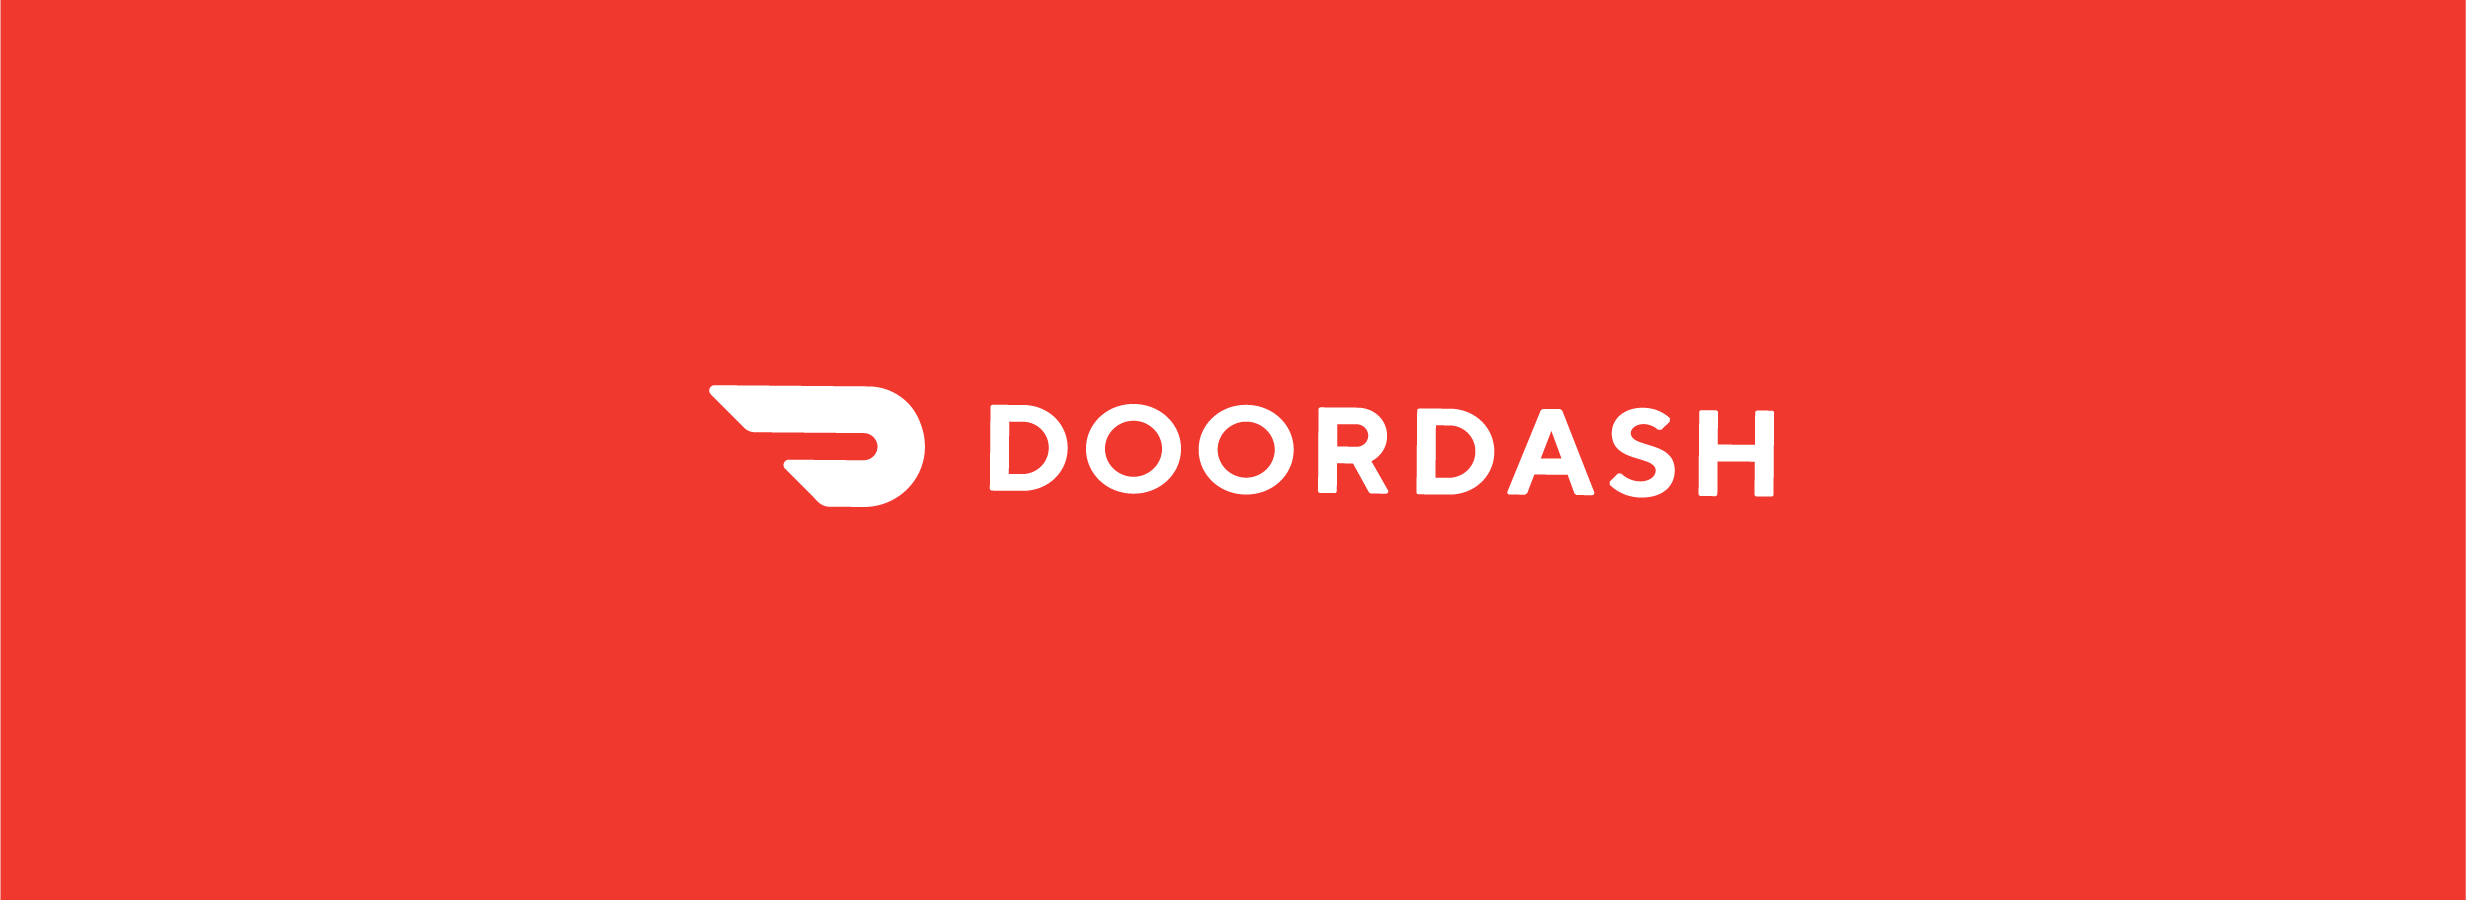  GEEKBEAR Car Magnet (2 Pack) - doordash driver Car Sign with  Doordash Logo - Reflective Waterproof Bumper Sign – No Stickers or Decals  but Magnets : Automotive